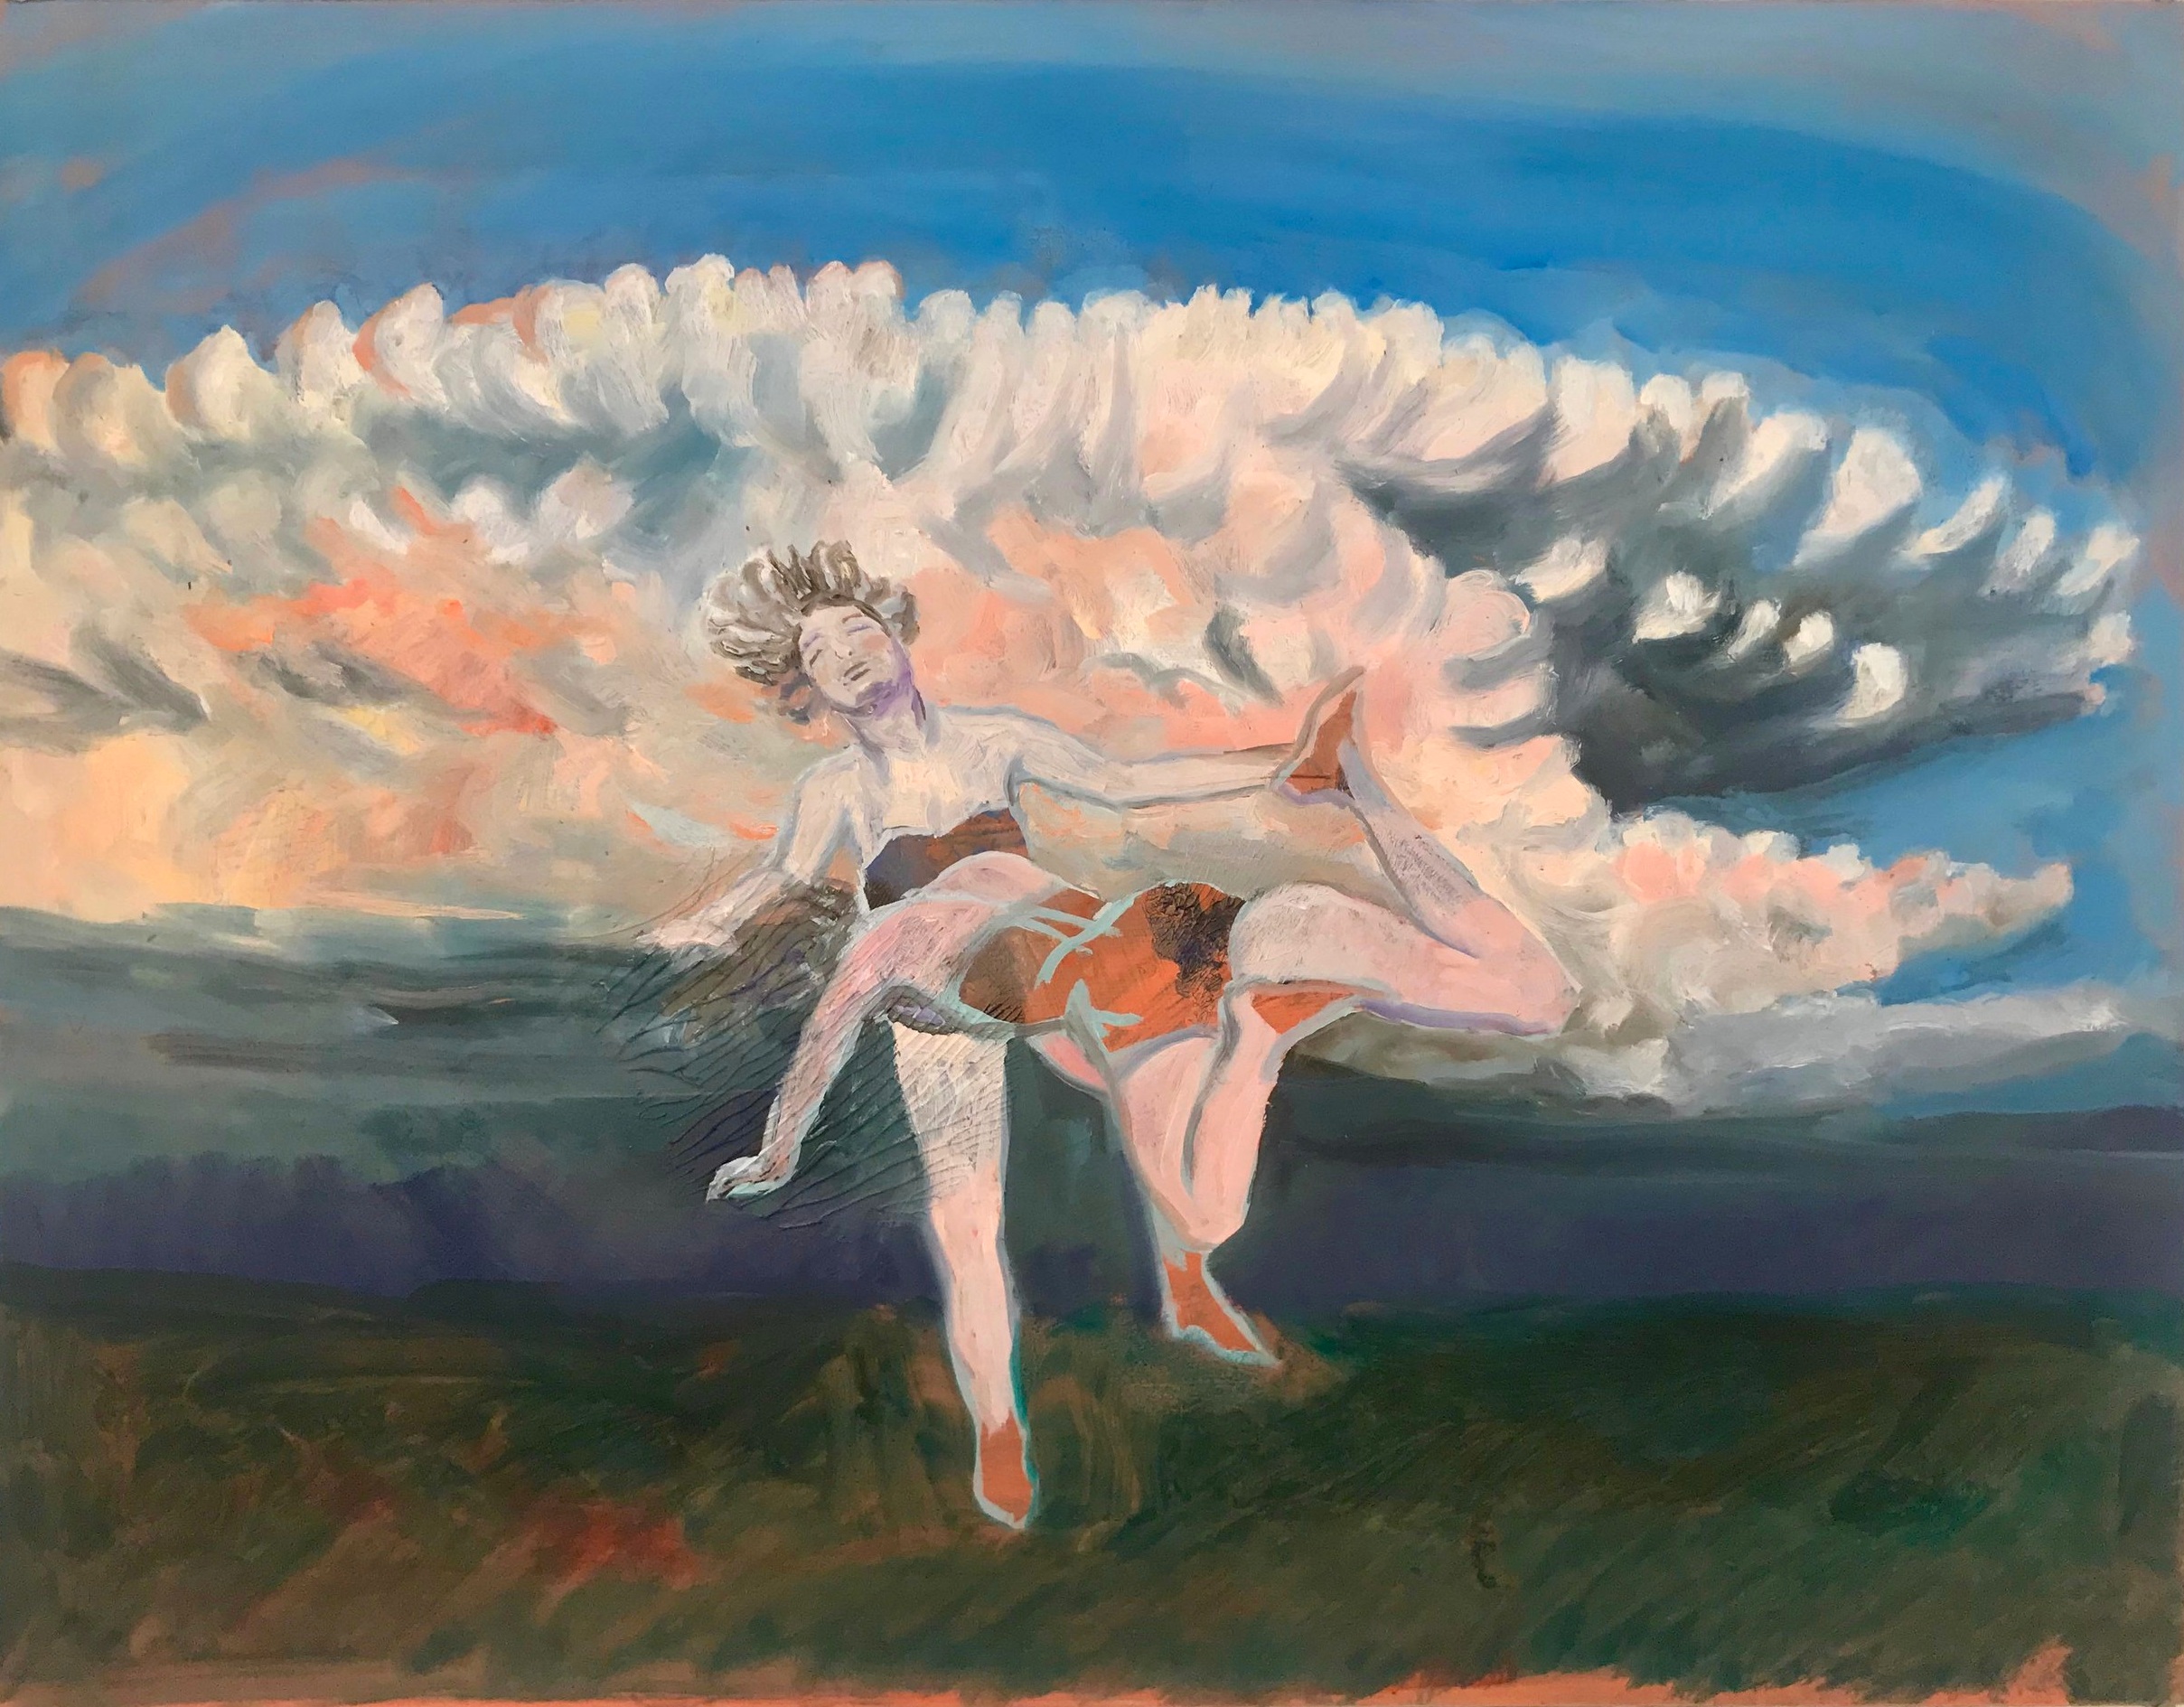   Cloud Wrestlers   oil on panel, 14 x 18 inches, 2019 